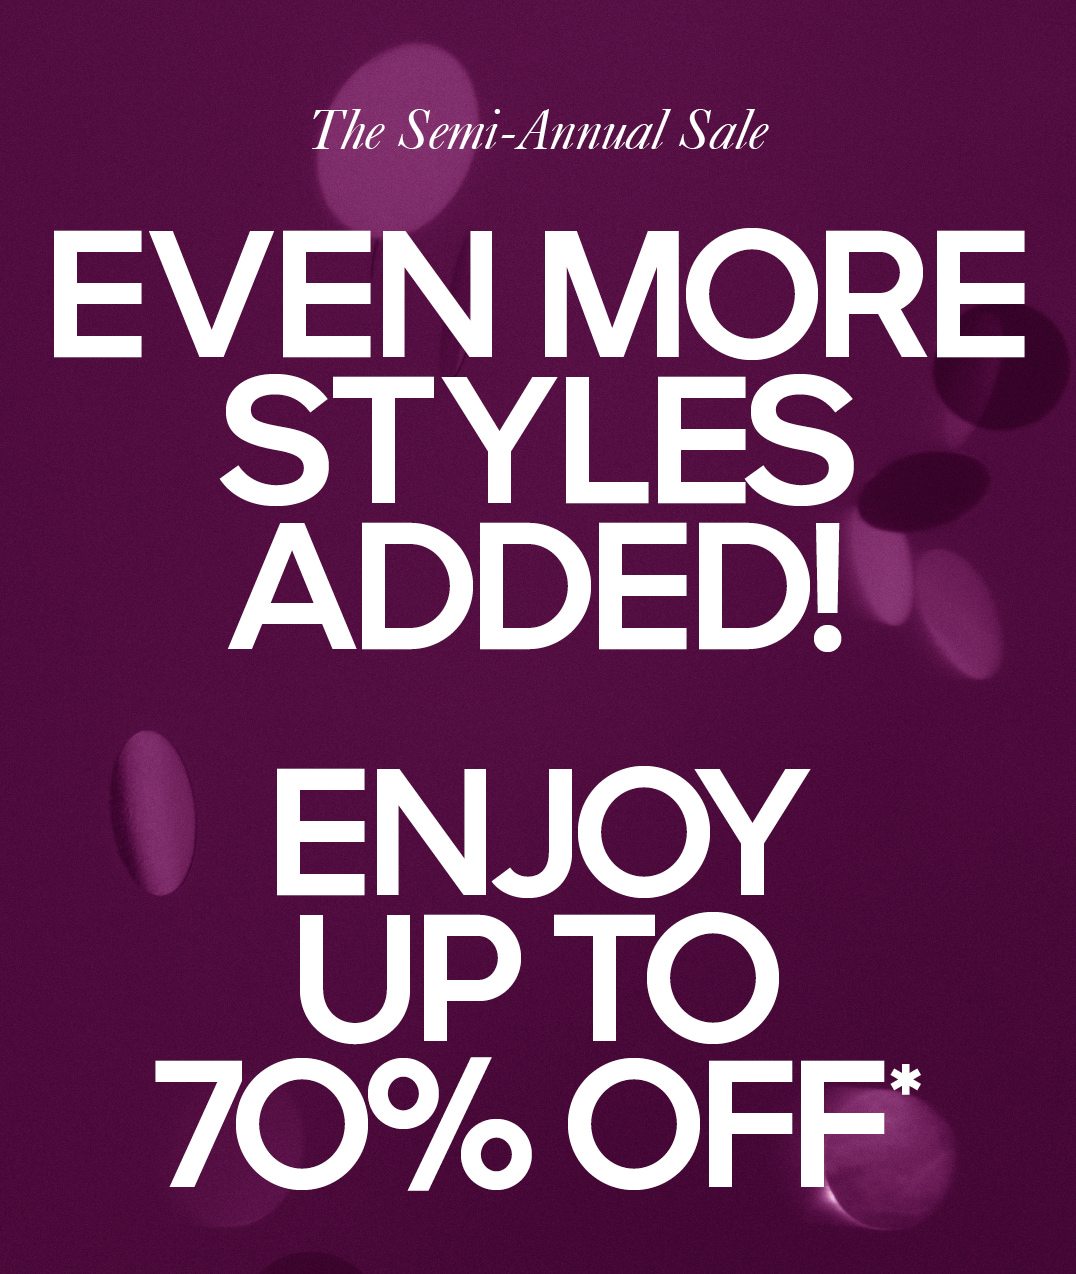 The Semi-Annual Sale EVEN MORE STYLES ADDED! ENJOY UP TO 70% OFF*